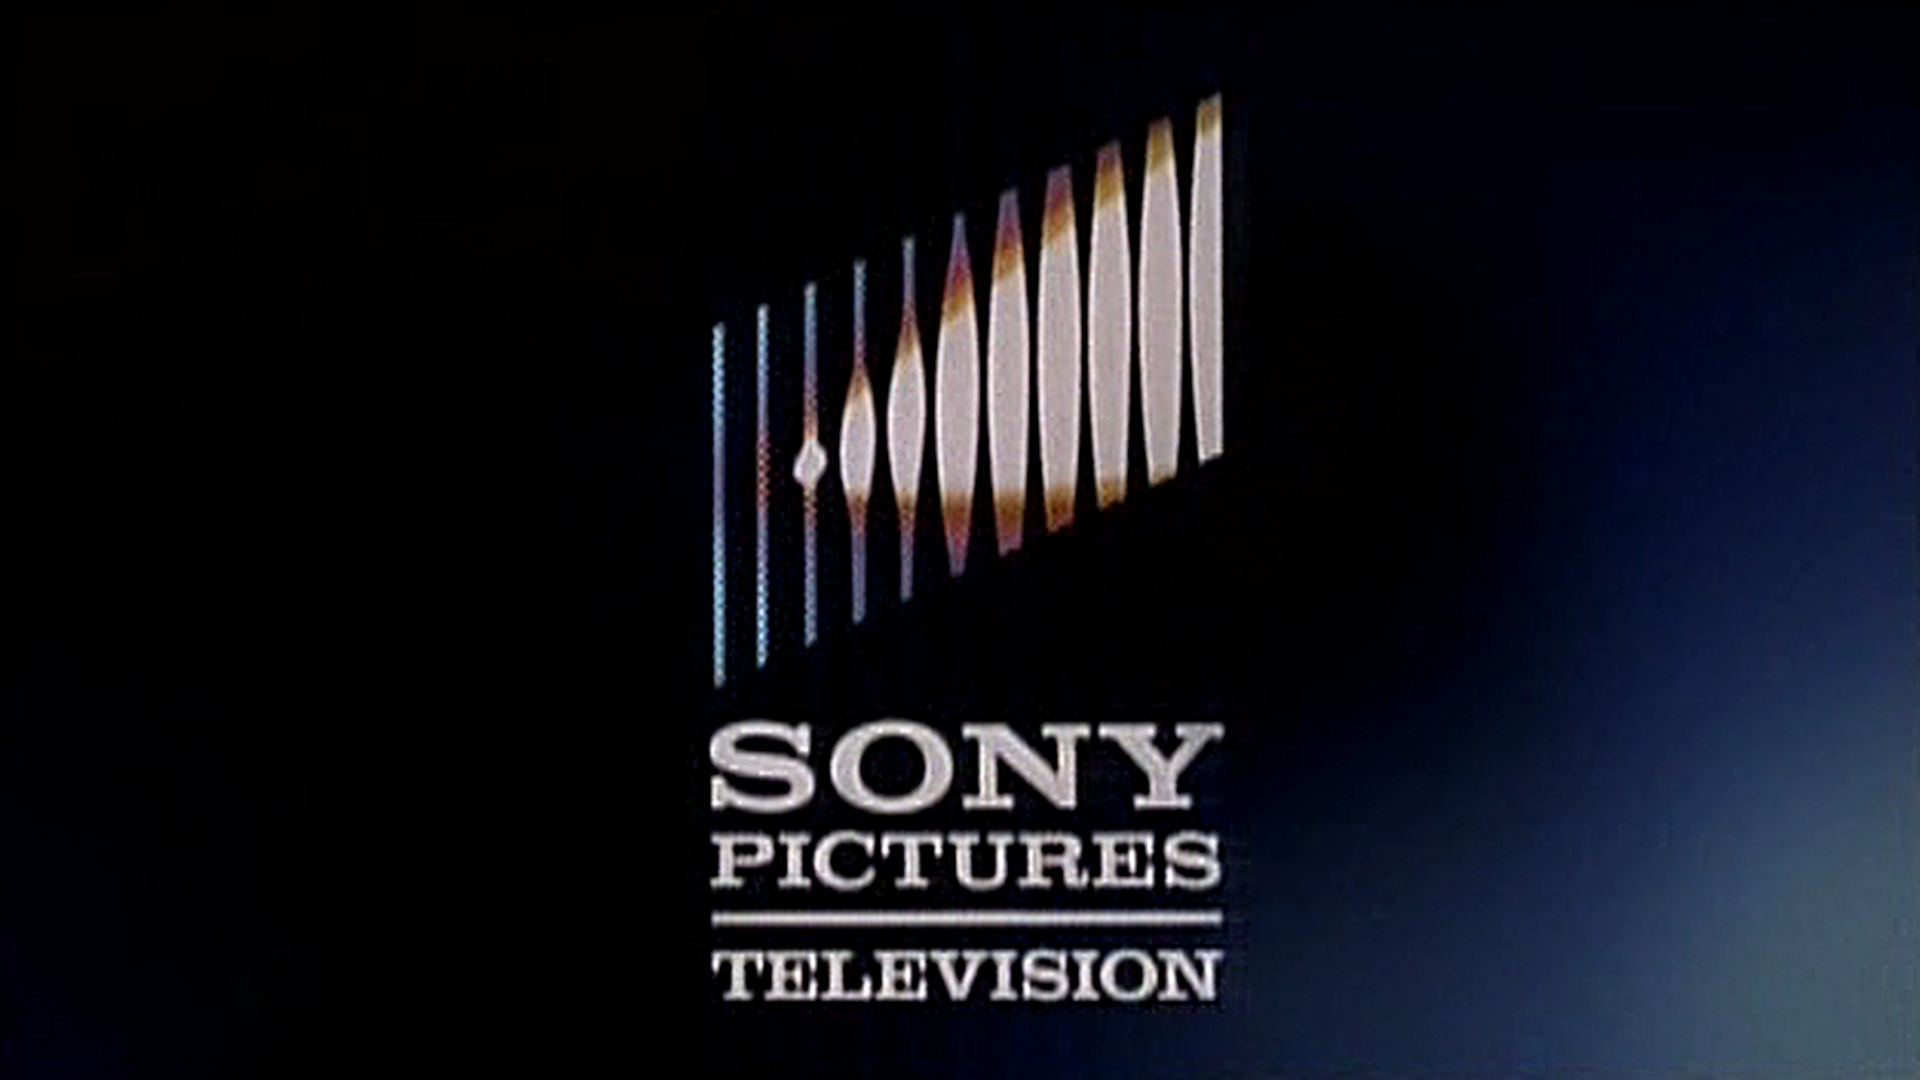 Sony Pictures Television (2003) - 16:9 / Filmed